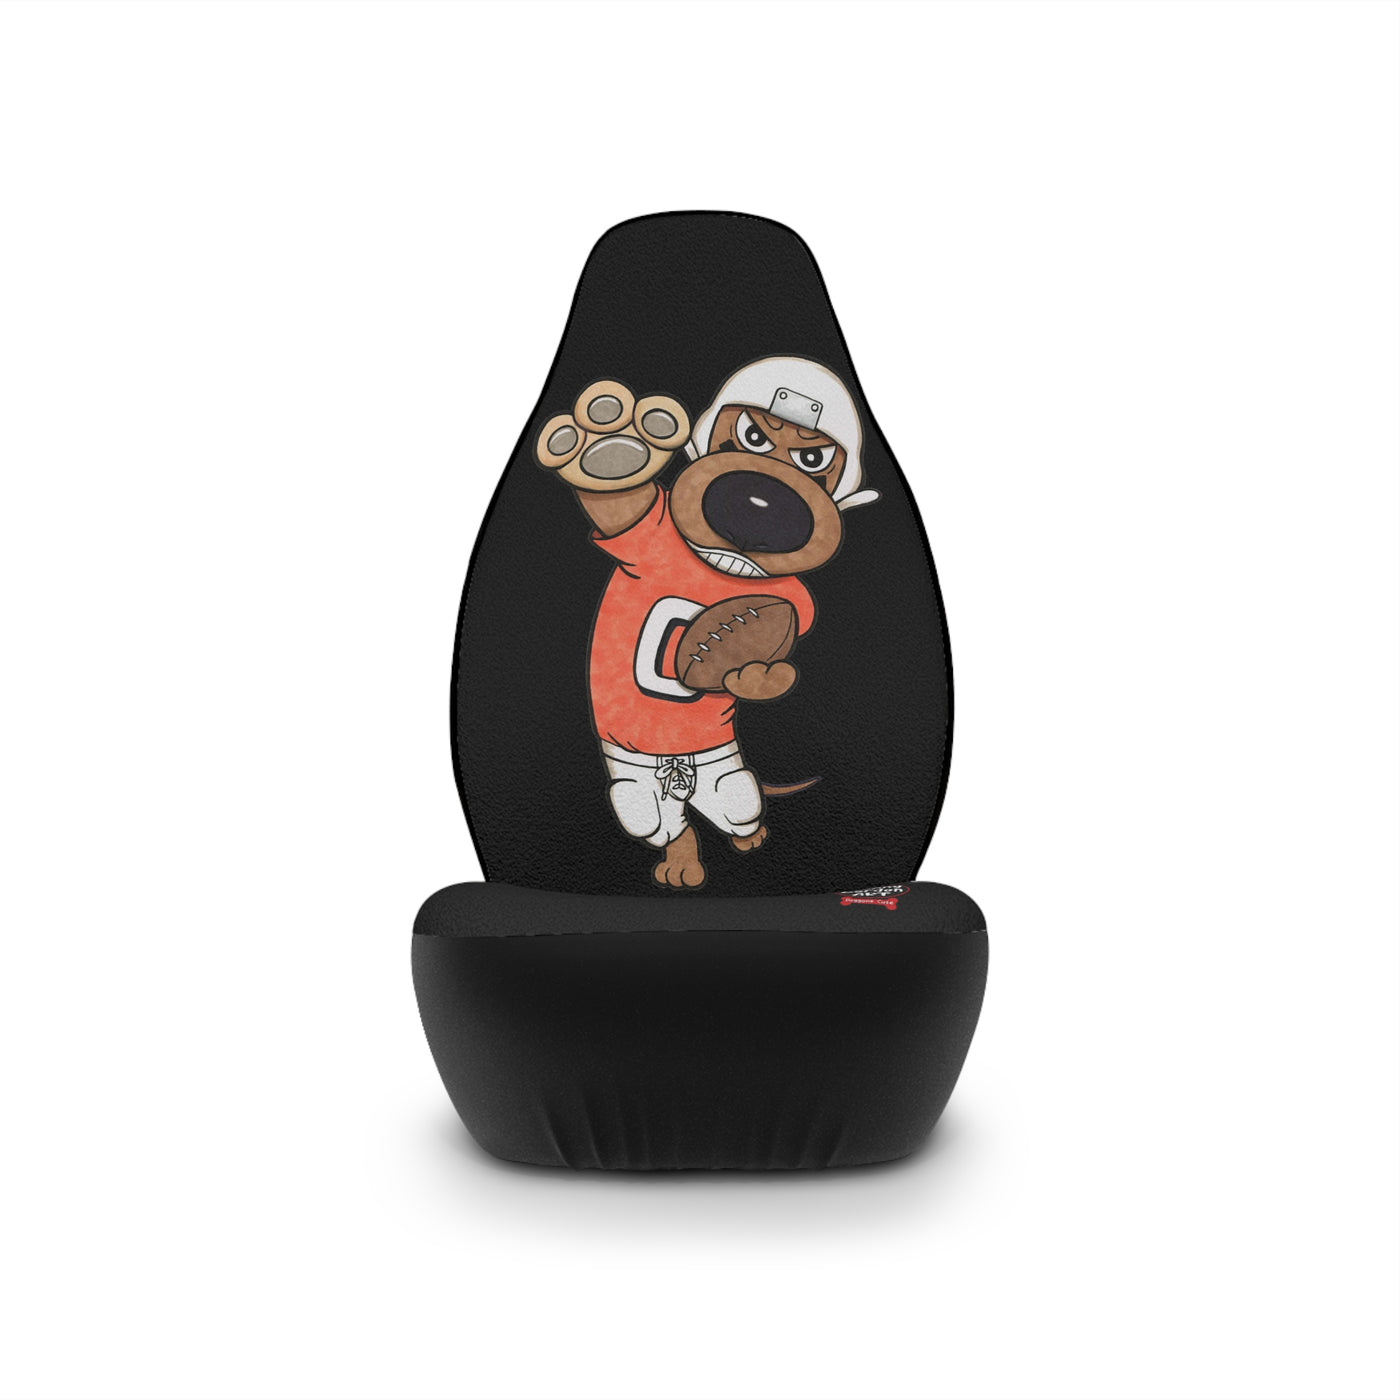 Cute Doxie Dog wearing orange playing football on Going Long Car Seat Covers